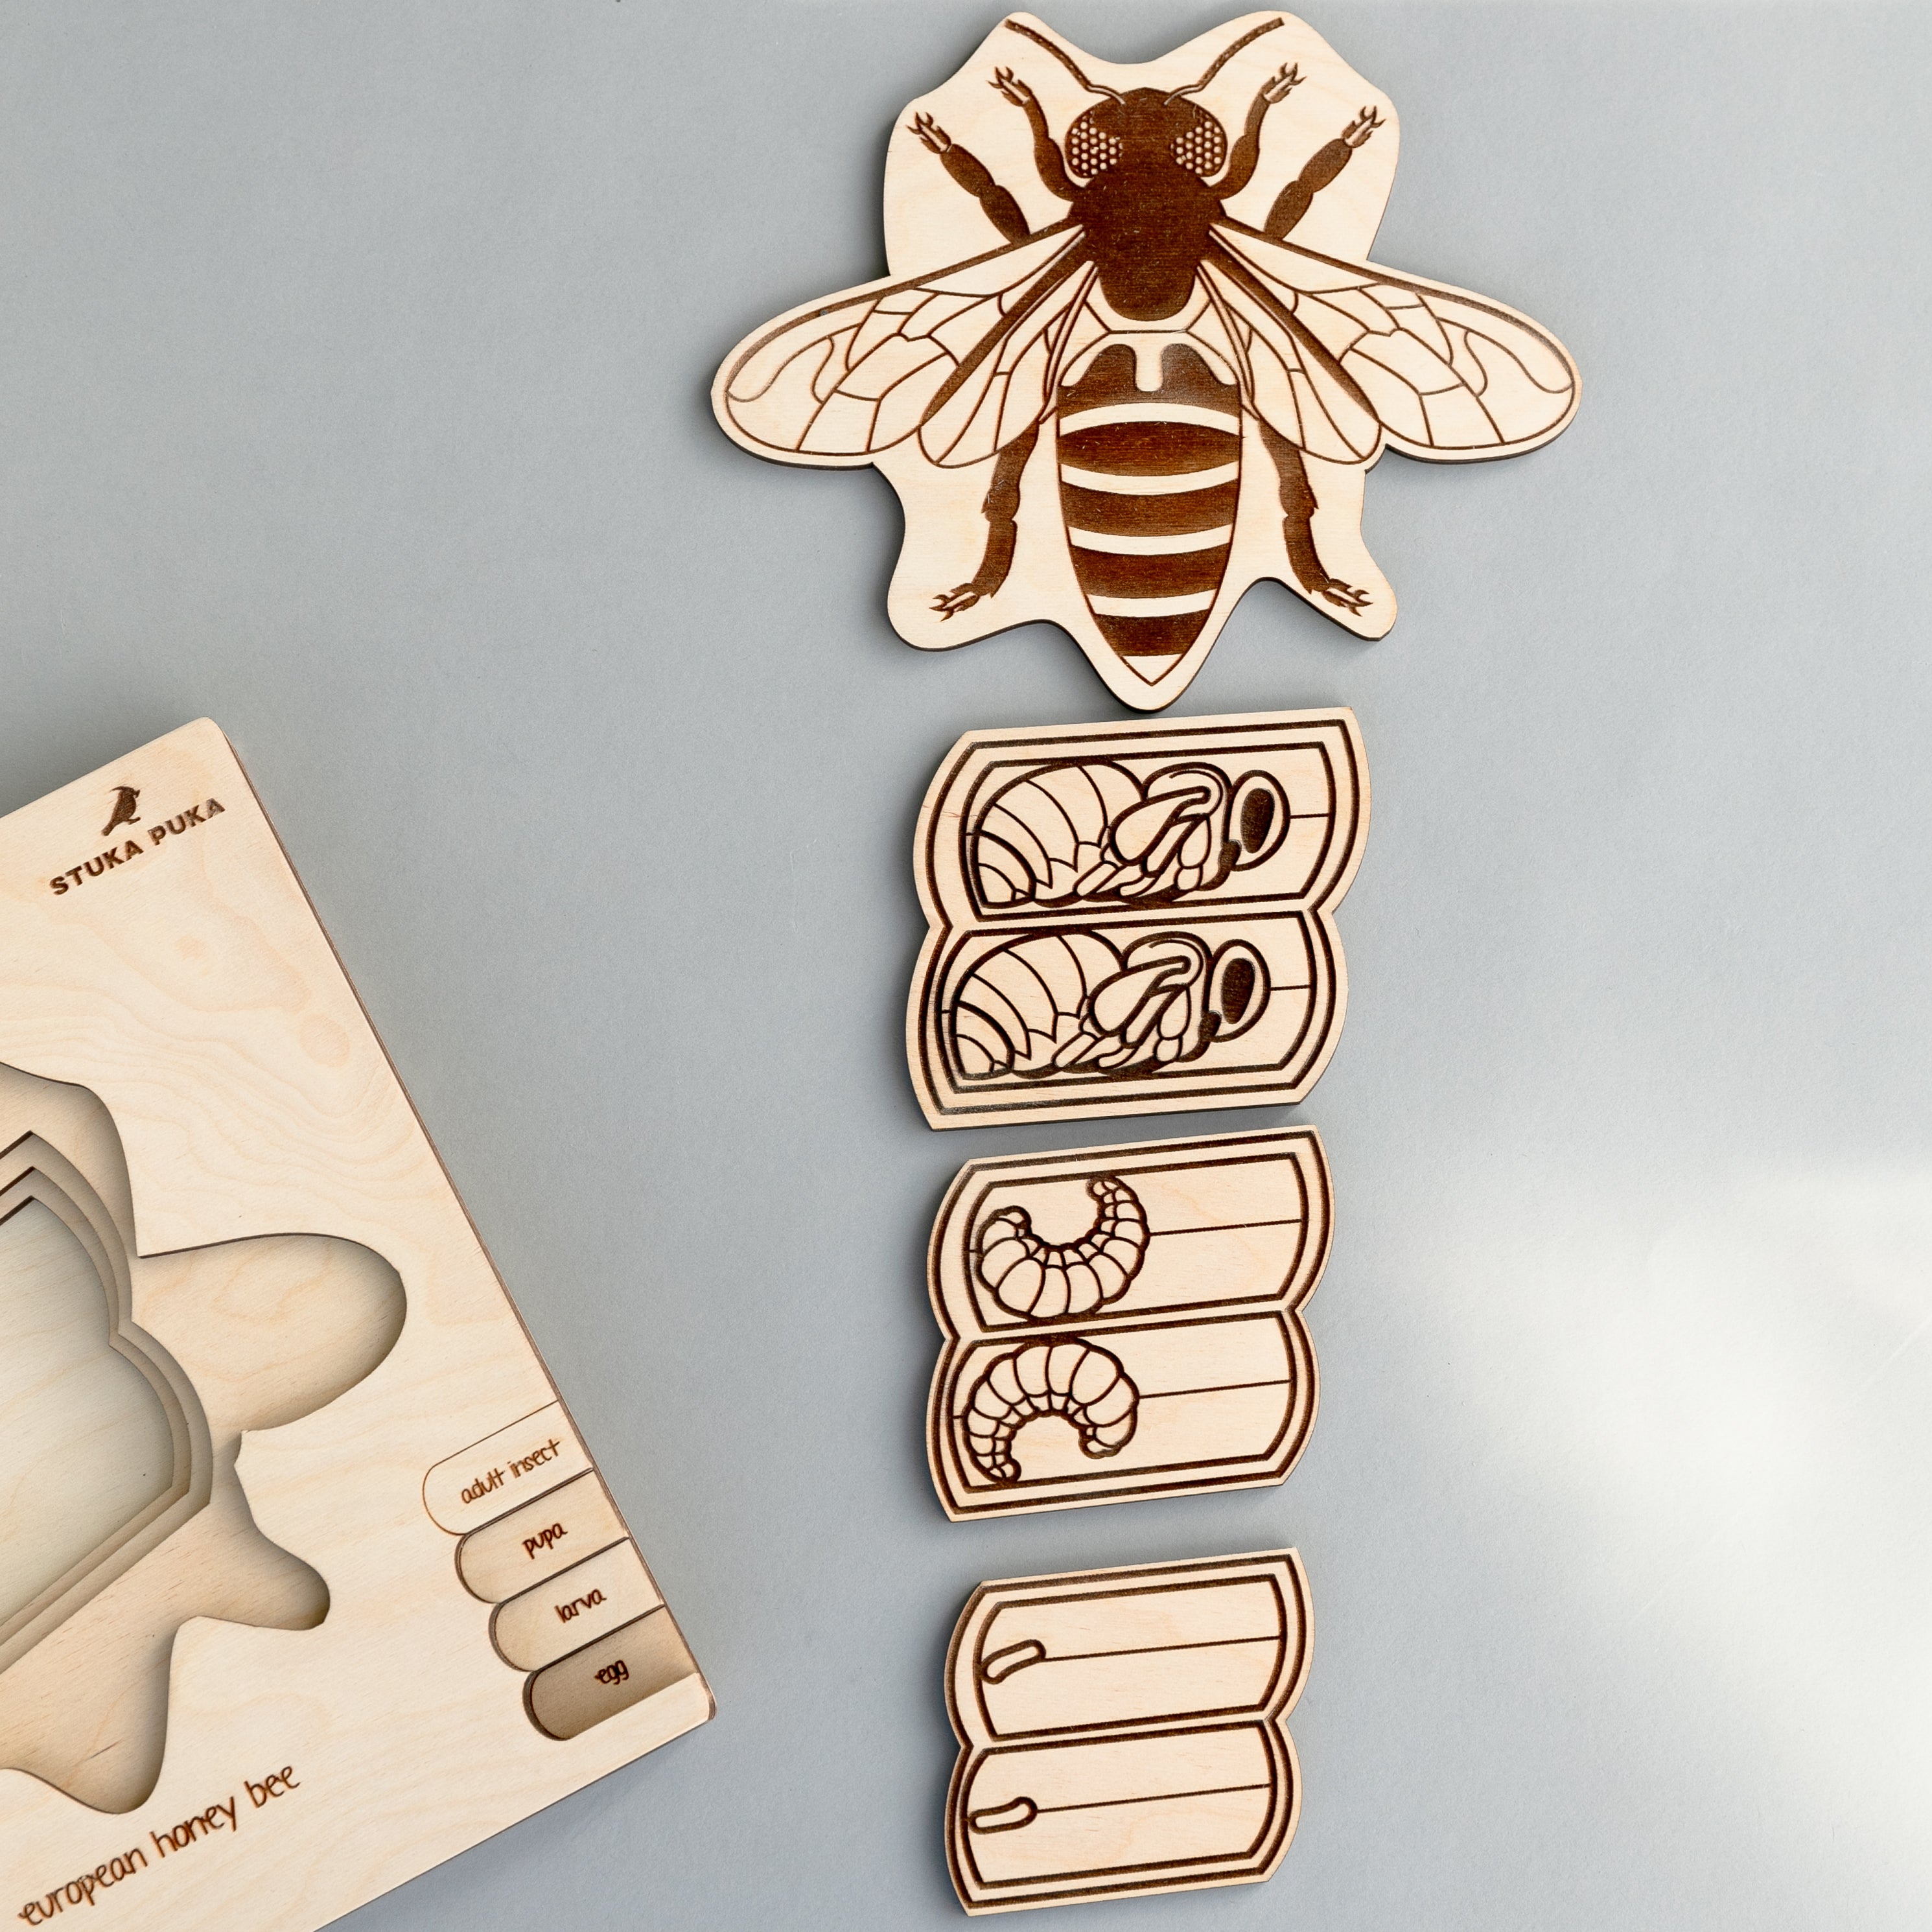 Honey Bee Life Cycle Wooden Puzzle